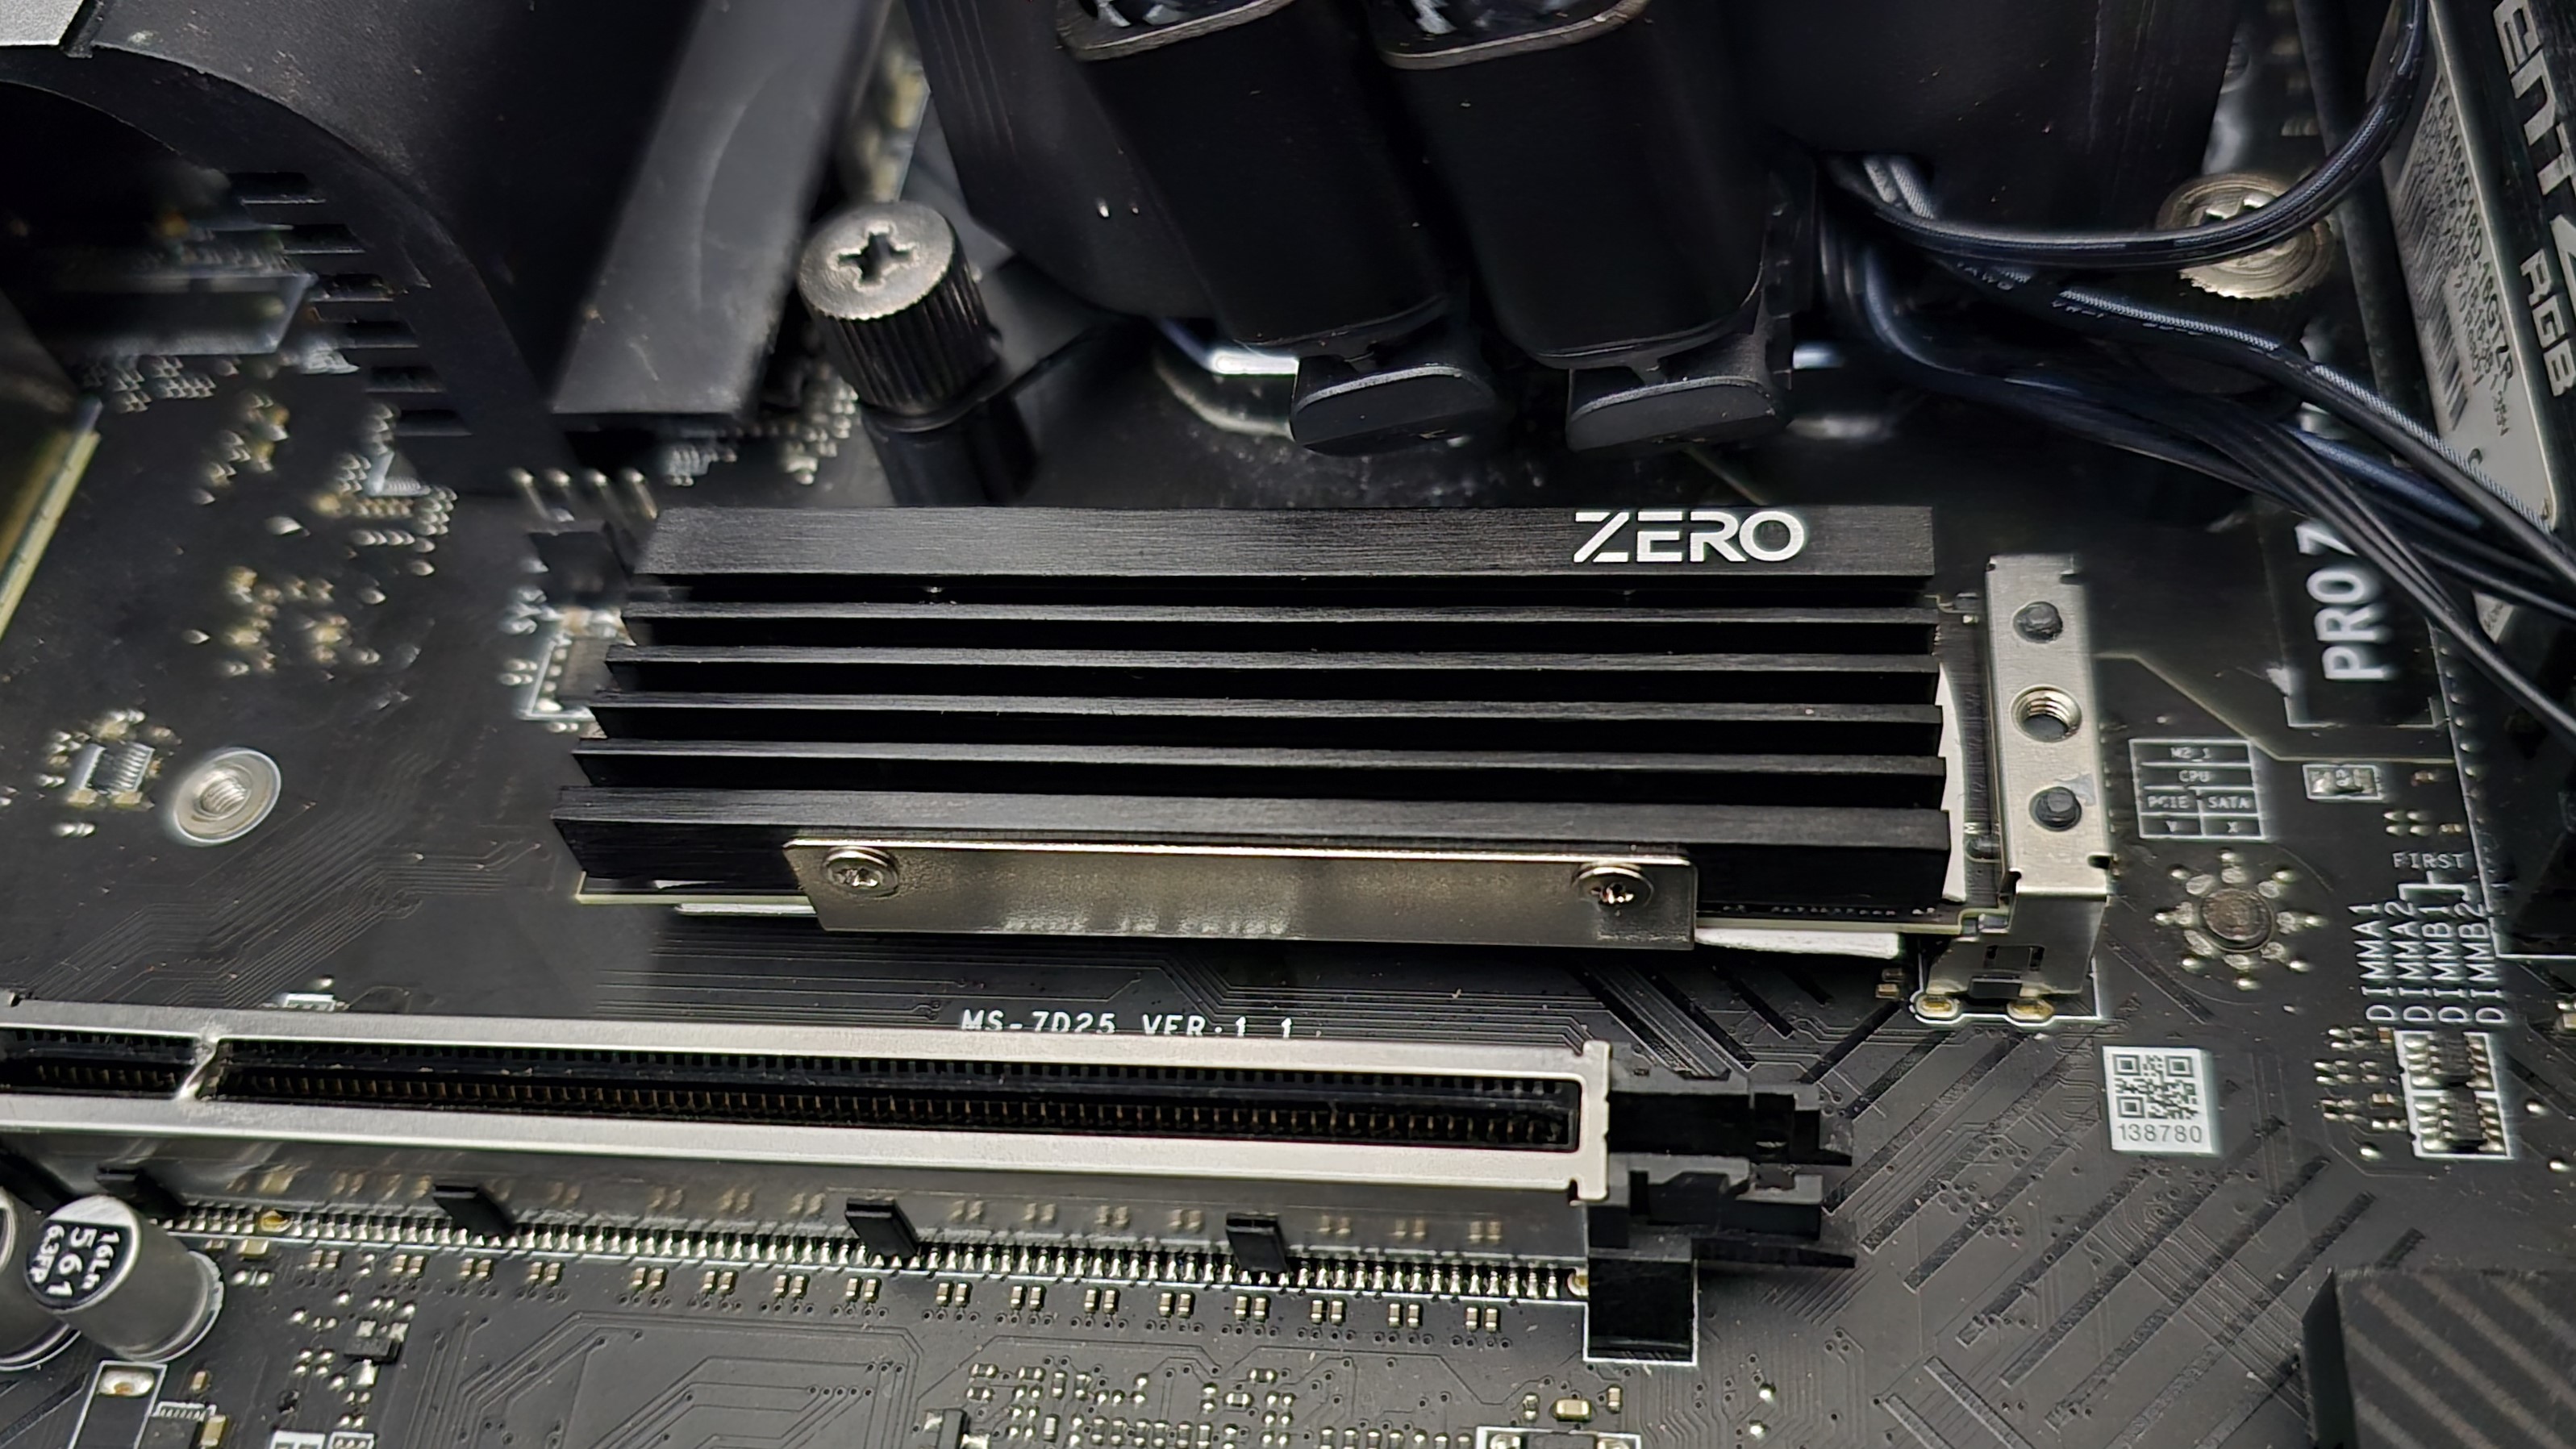 ID-Cooling Zero M05 and M15